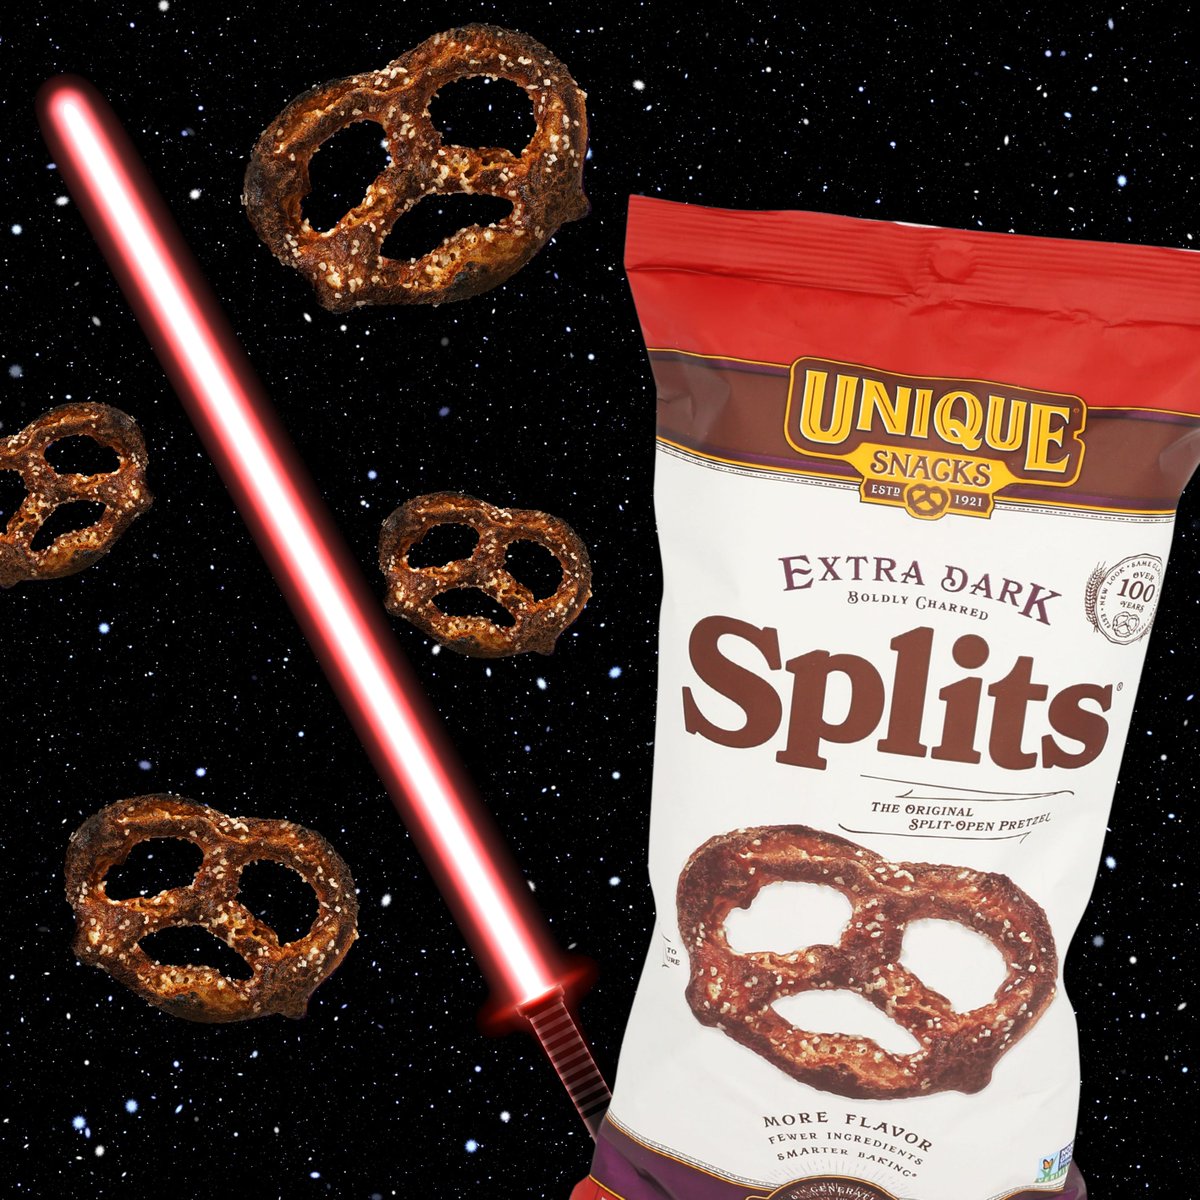 With a bold charred flavor and rich taste, Extra Dark Splits are perhaps our most polarizing snack! Are you a fan of the dark side? 🌌🥨

#UniqueSnacks #GetUnique #pretzels #snacks